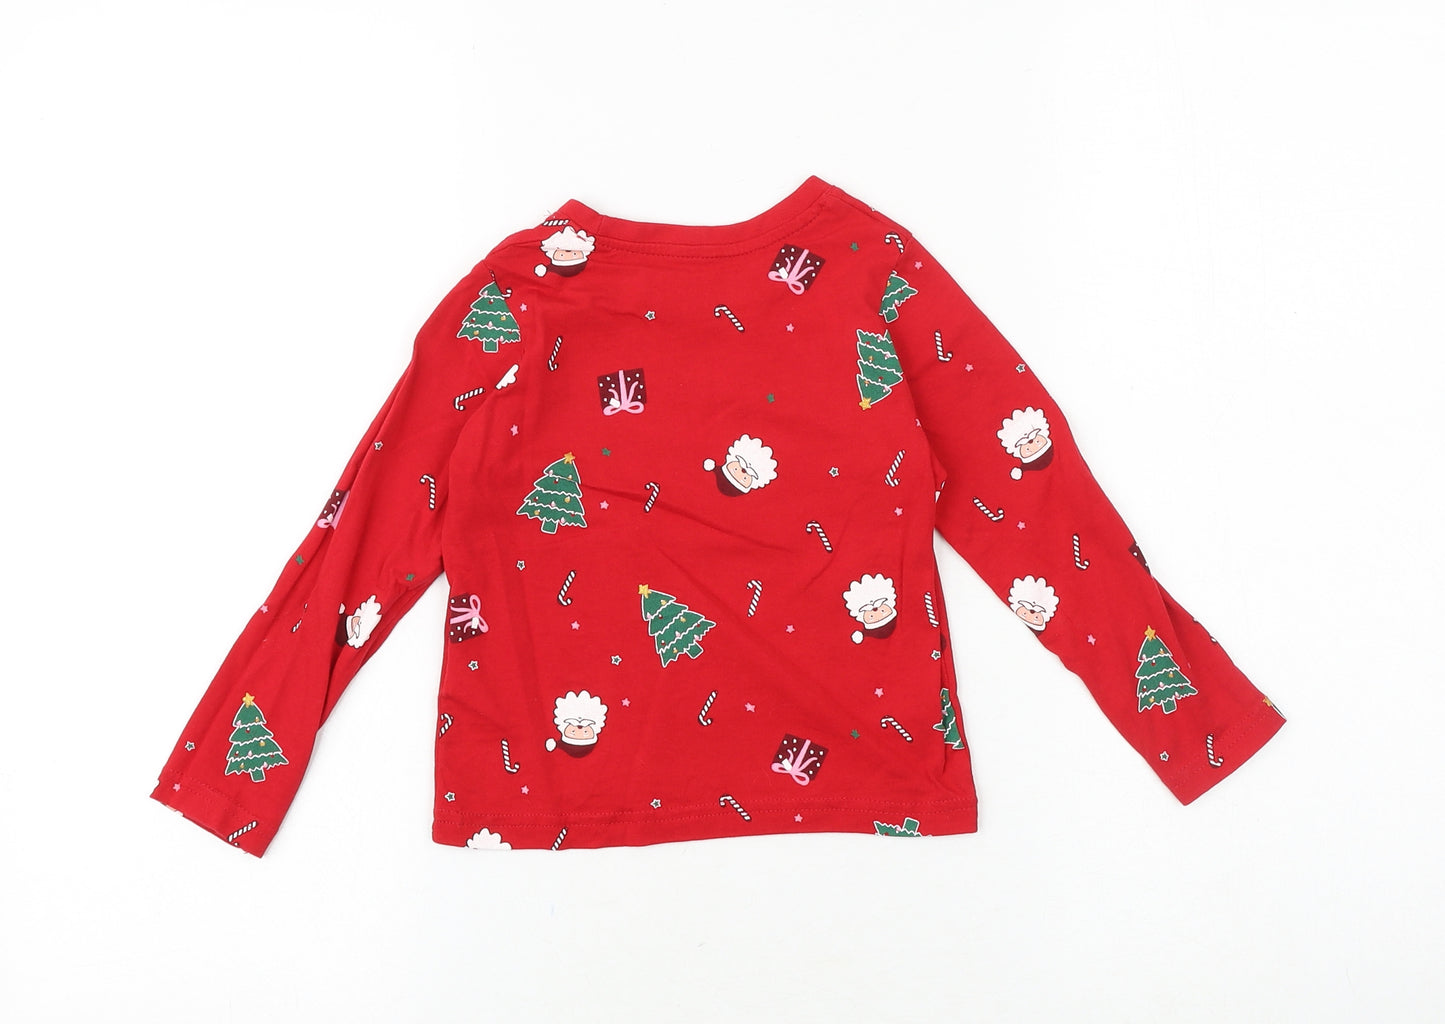 Primark Girls Red Geometric Cotton Basic T-Shirt Size 2-3 Years Round Neck Pullover - Christmas Pattern